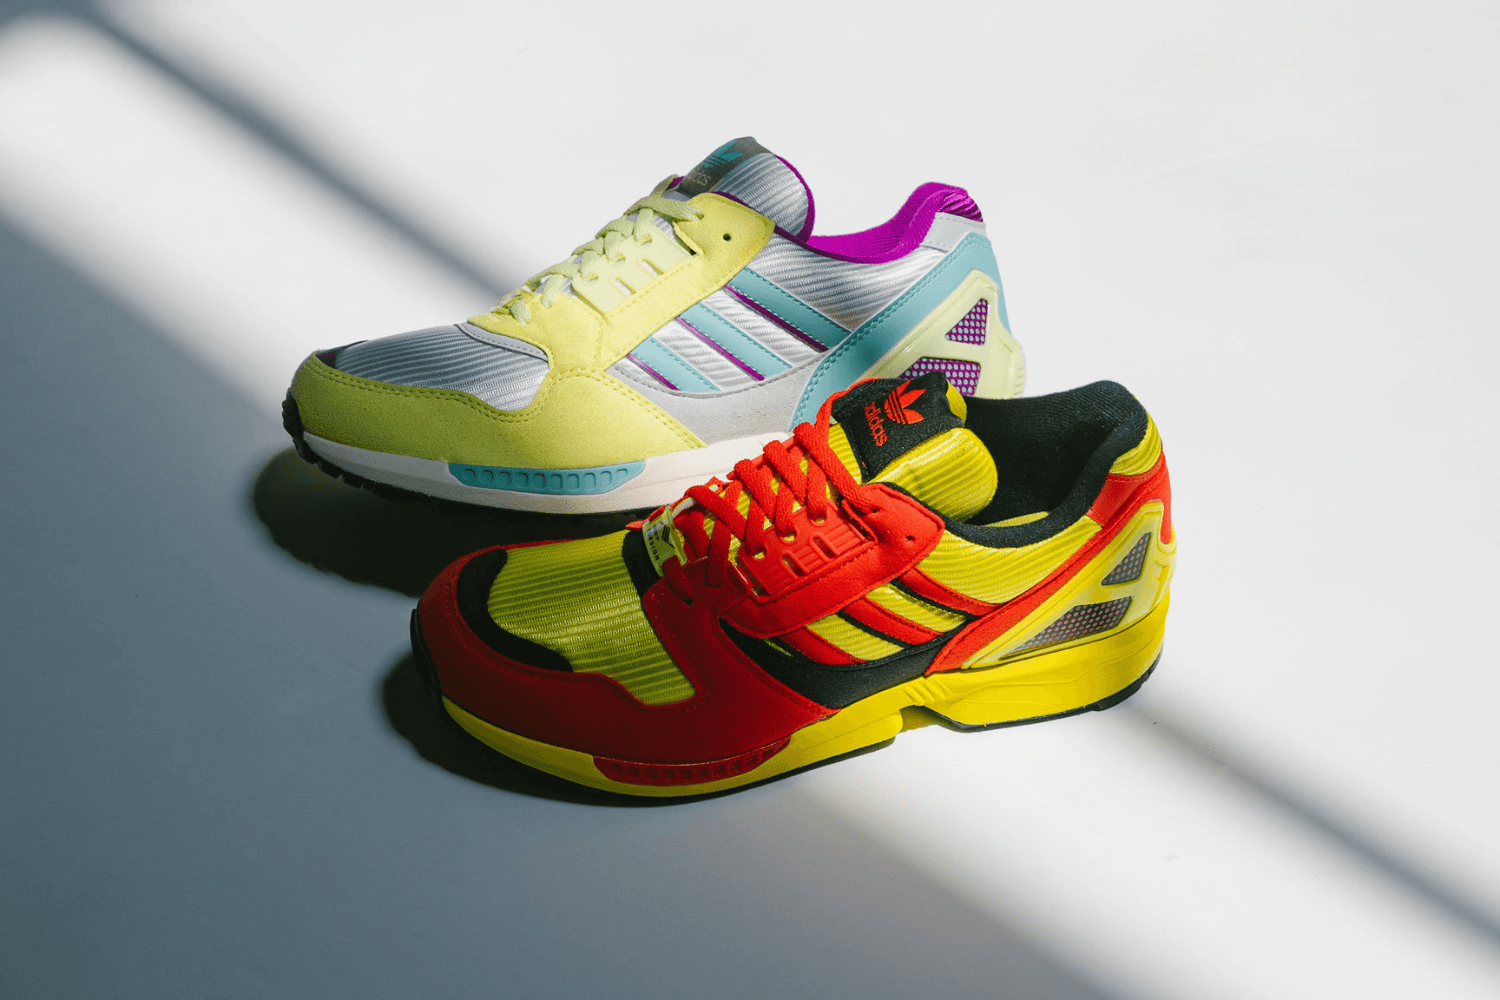 Comeback of the ZX 8000 'Germany' and ZX 9000 'Citrus'